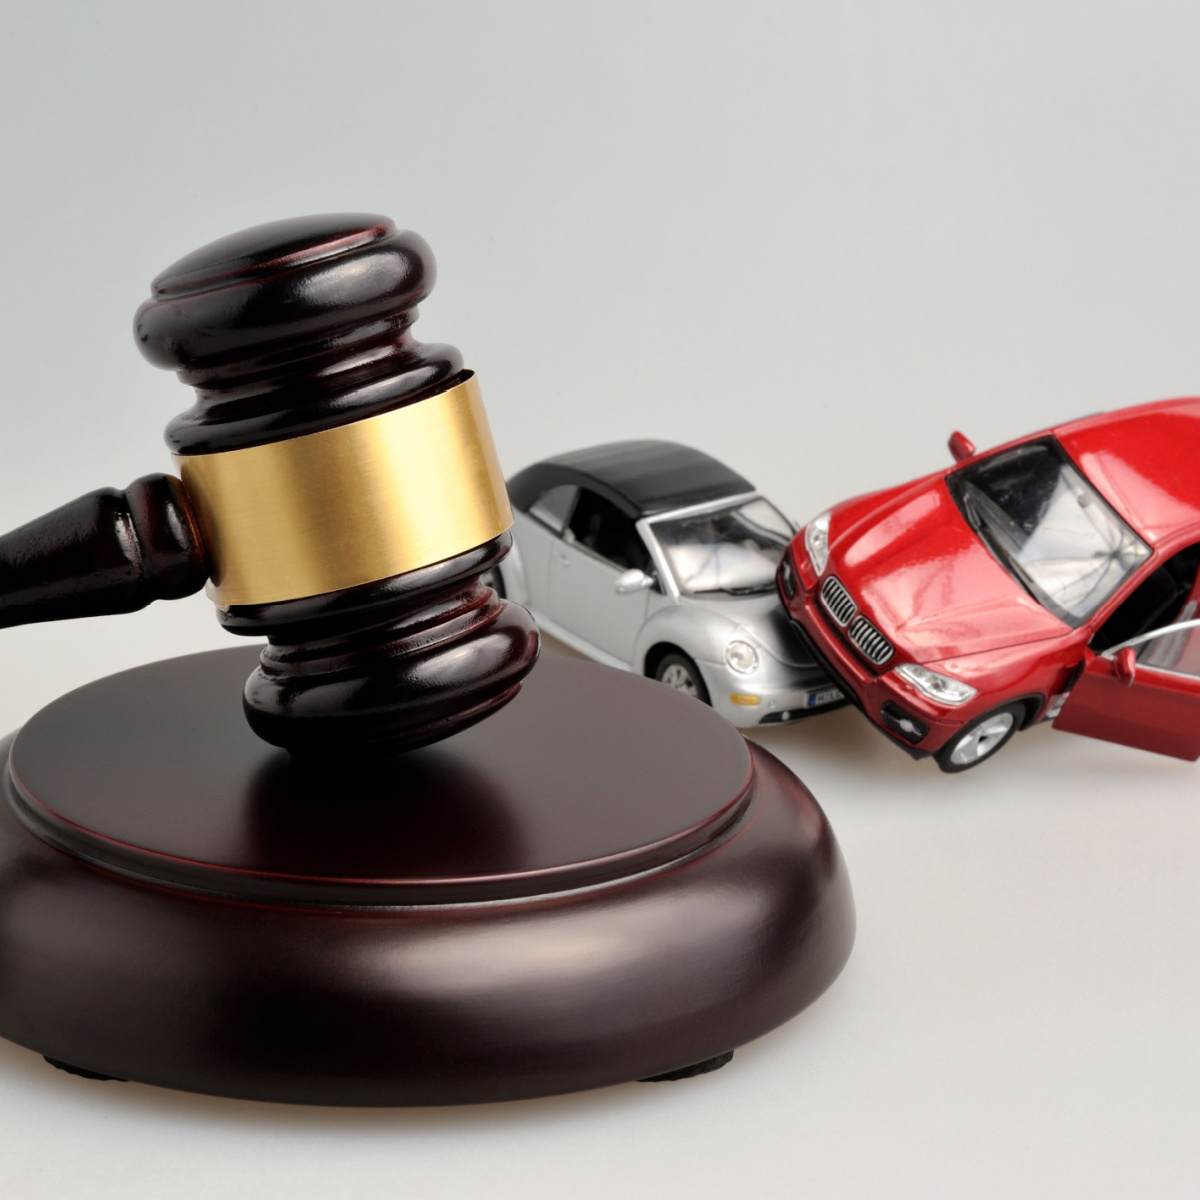 Houston personal injury lawyer discusses a victim’s rights after a car accident.